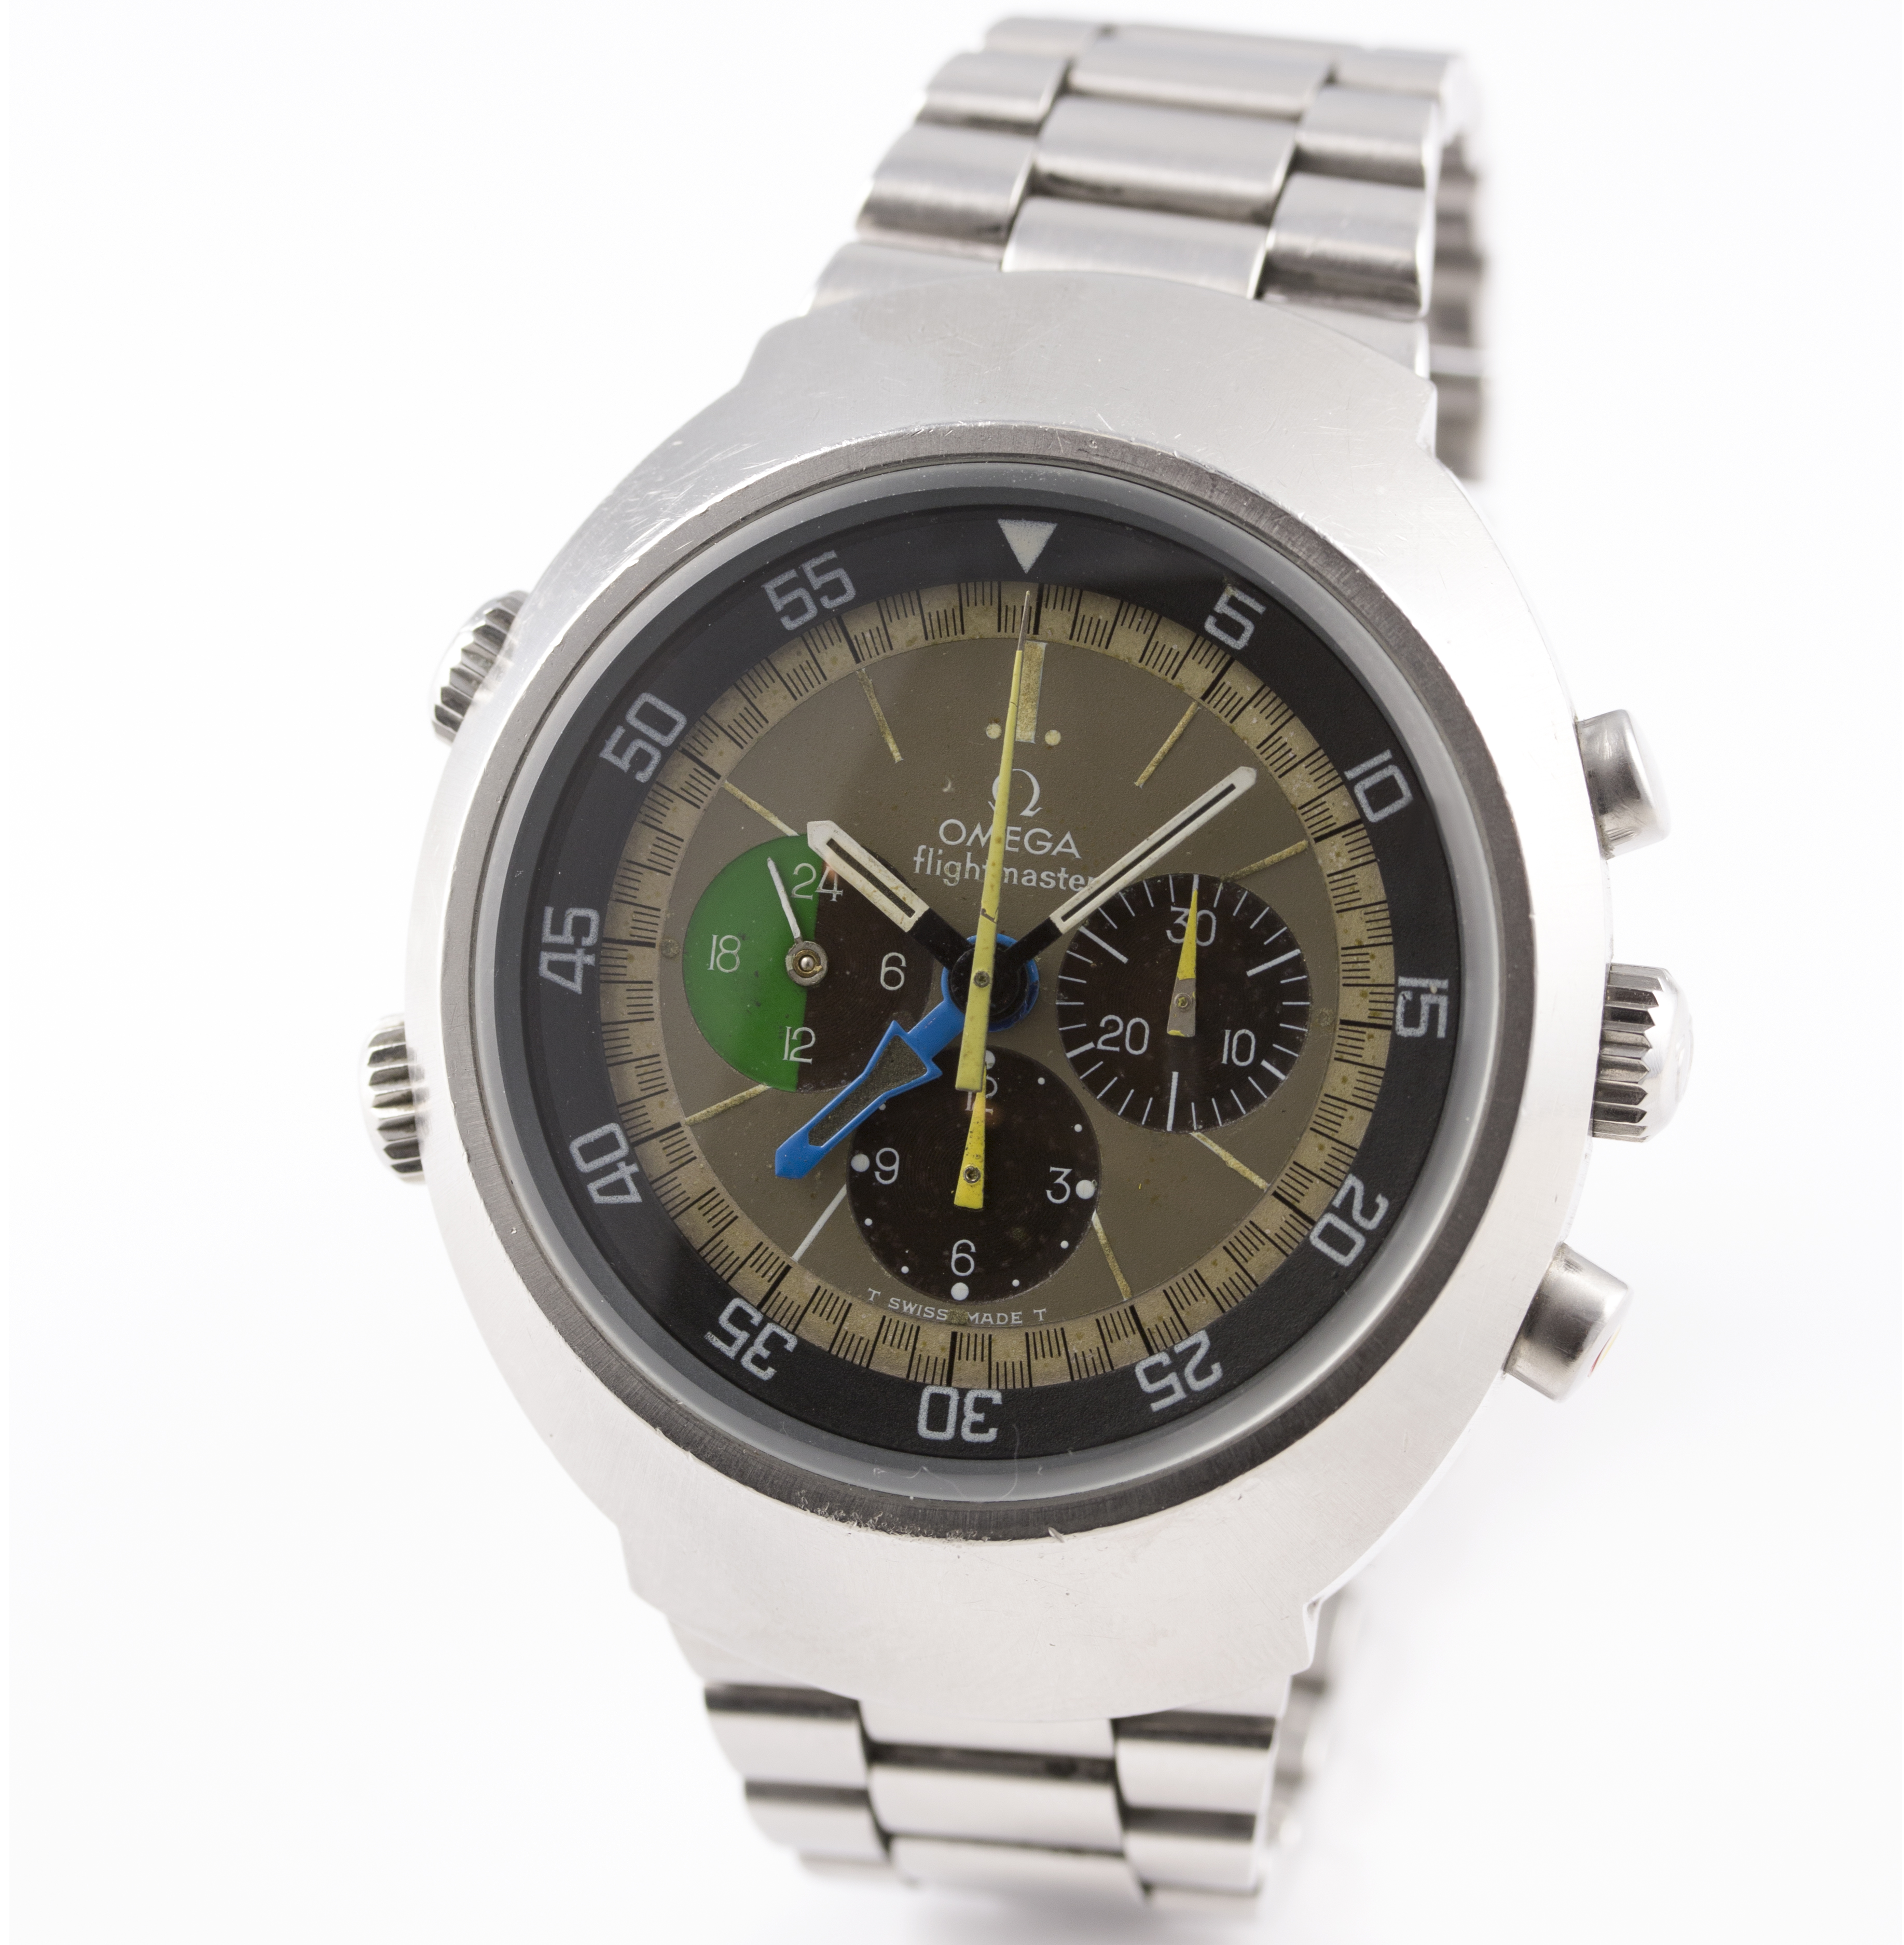 A RARE GENTLEMAN’S STAINLESS STEEL OMEGA FLIGHTMASTER CHRONOGRAPH BRACELET WATCH
CIRCA 1970, REF. 14 - Image 3 of 10